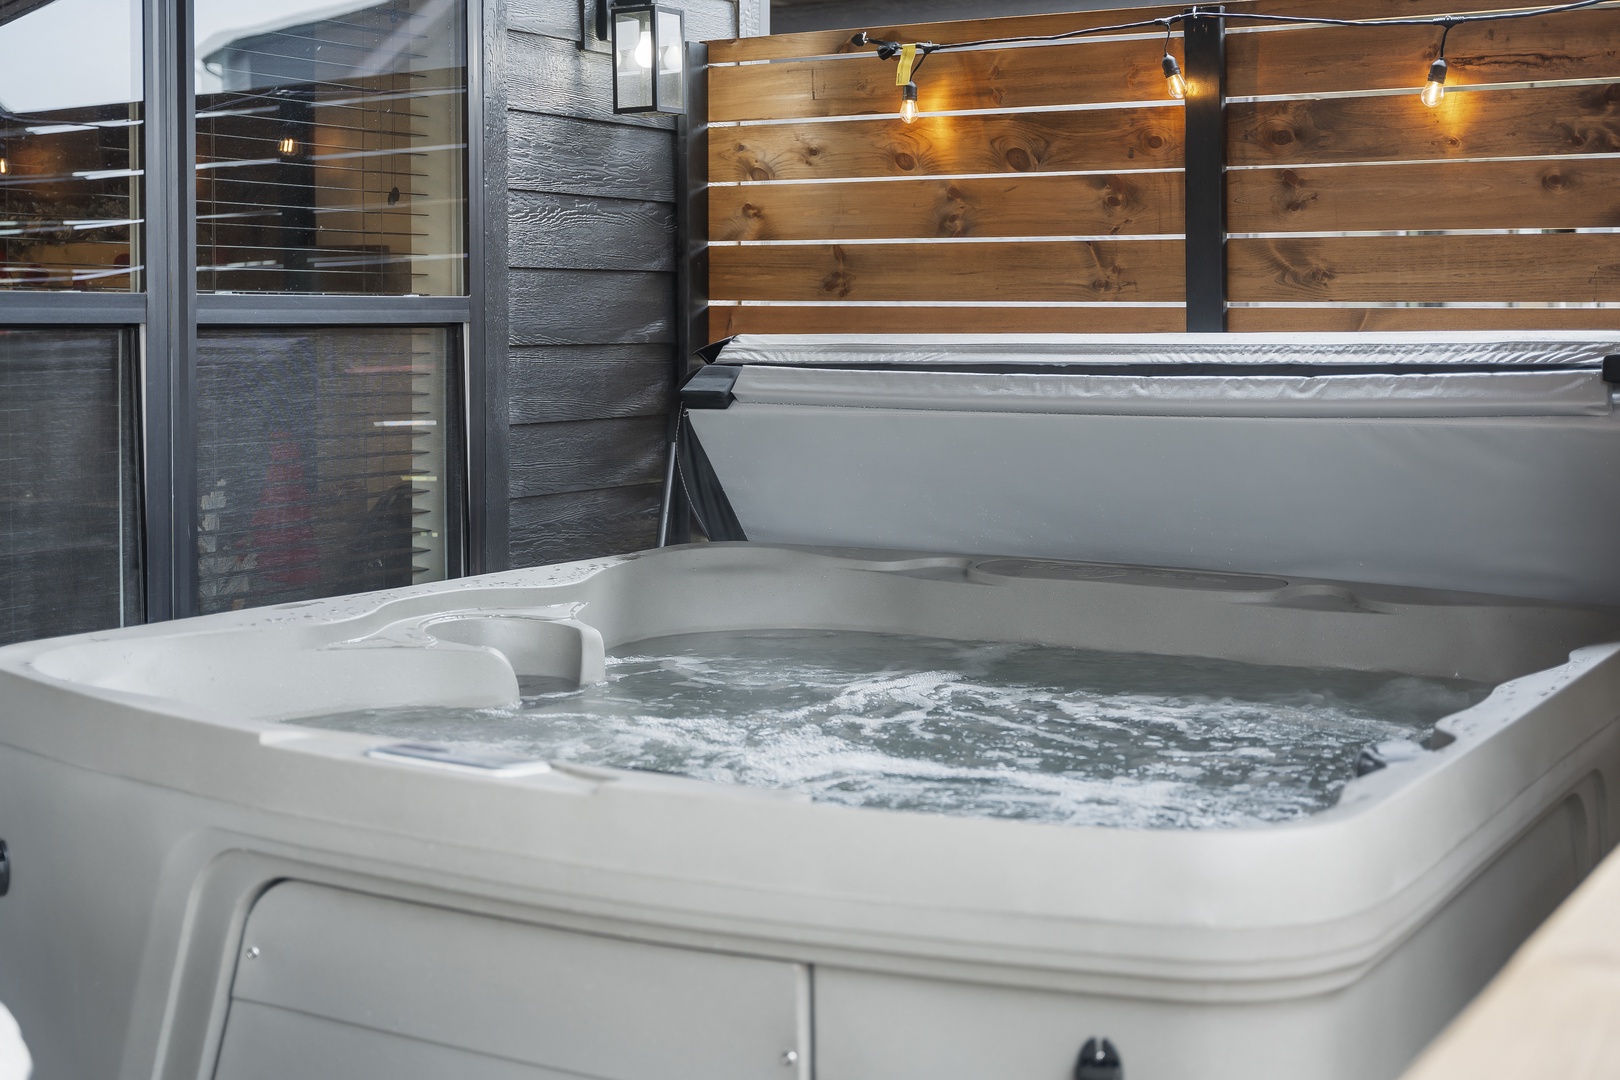 Indulge in relaxation as you soak away cares in the secluded hot tub